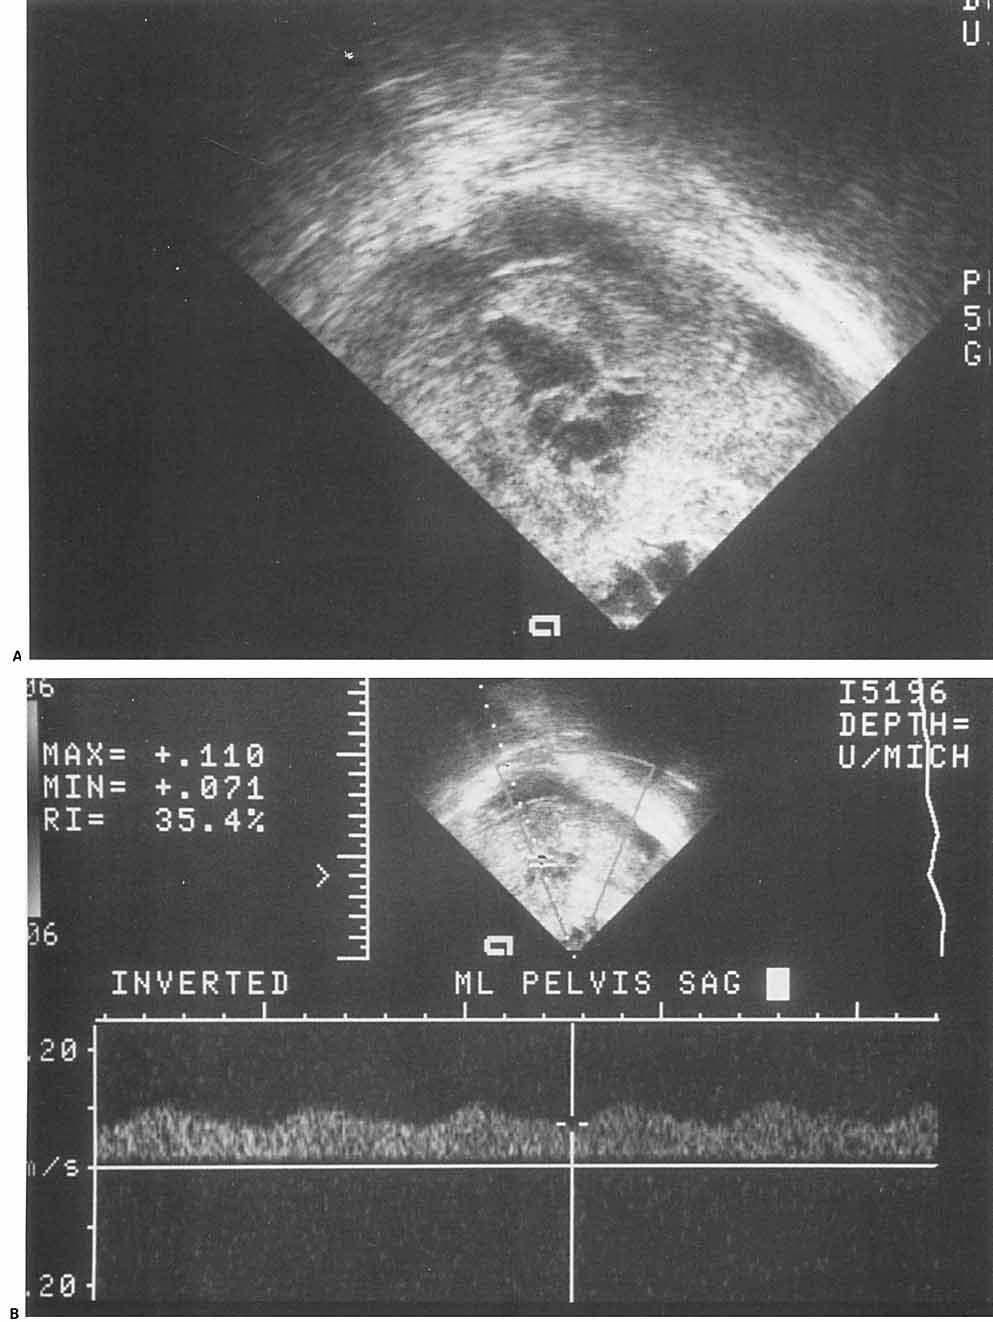 CASE REPORT: NEWMAN AND ADLER FIGURE 1. (A) Sagittal, midline pelvic sonogram with endovaginal probe. Complex mass is evident with no visible uterine contours.